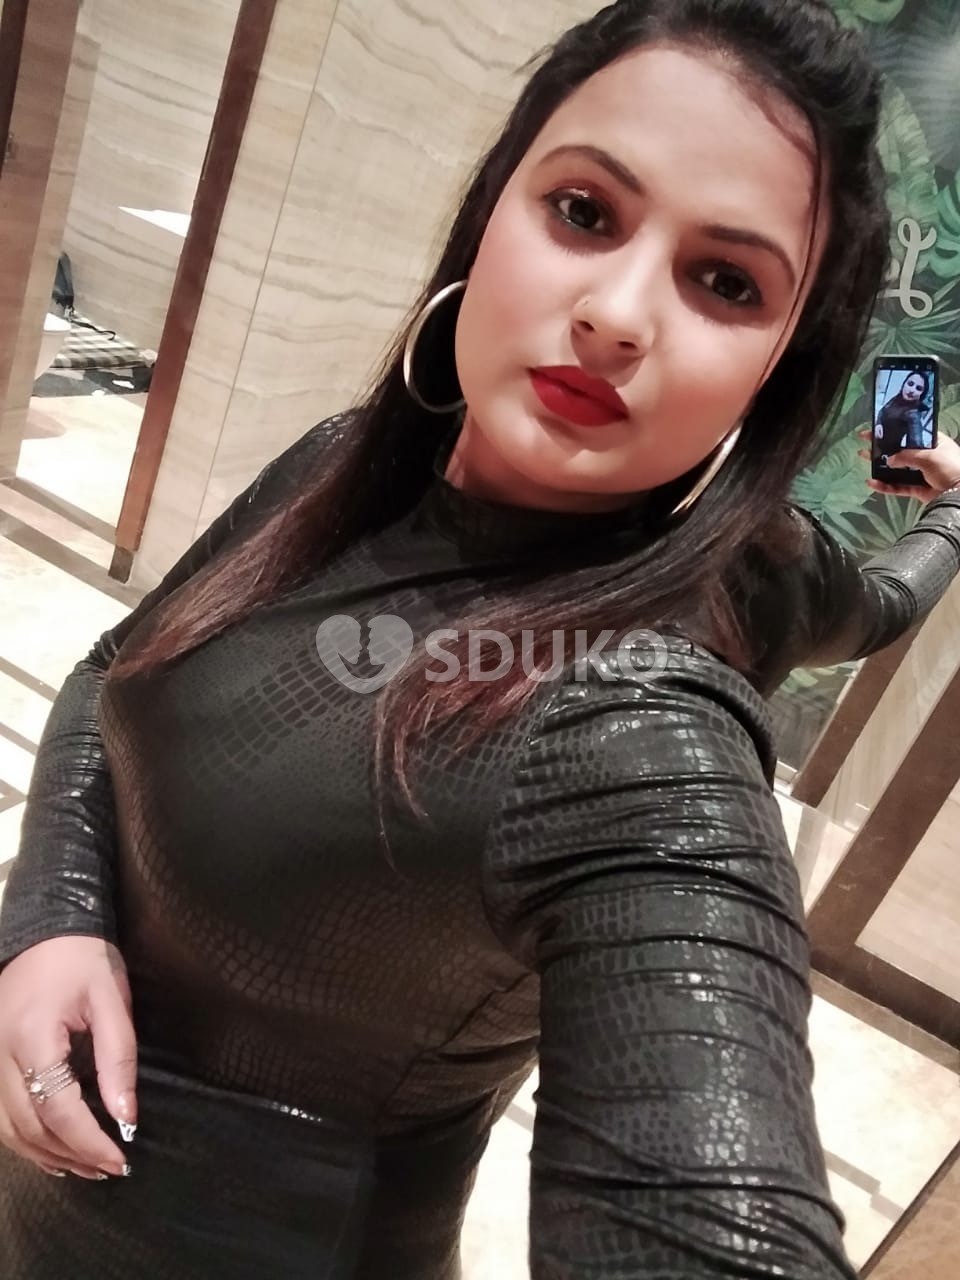 Visakhapatnam ❣️✅🥰..100% SAFE AND SECURE TODAY LOW PRICE UNLIMITED ENJOY HOT COLLEGE GIRL HOUSEWIFE AUNTIES AVA